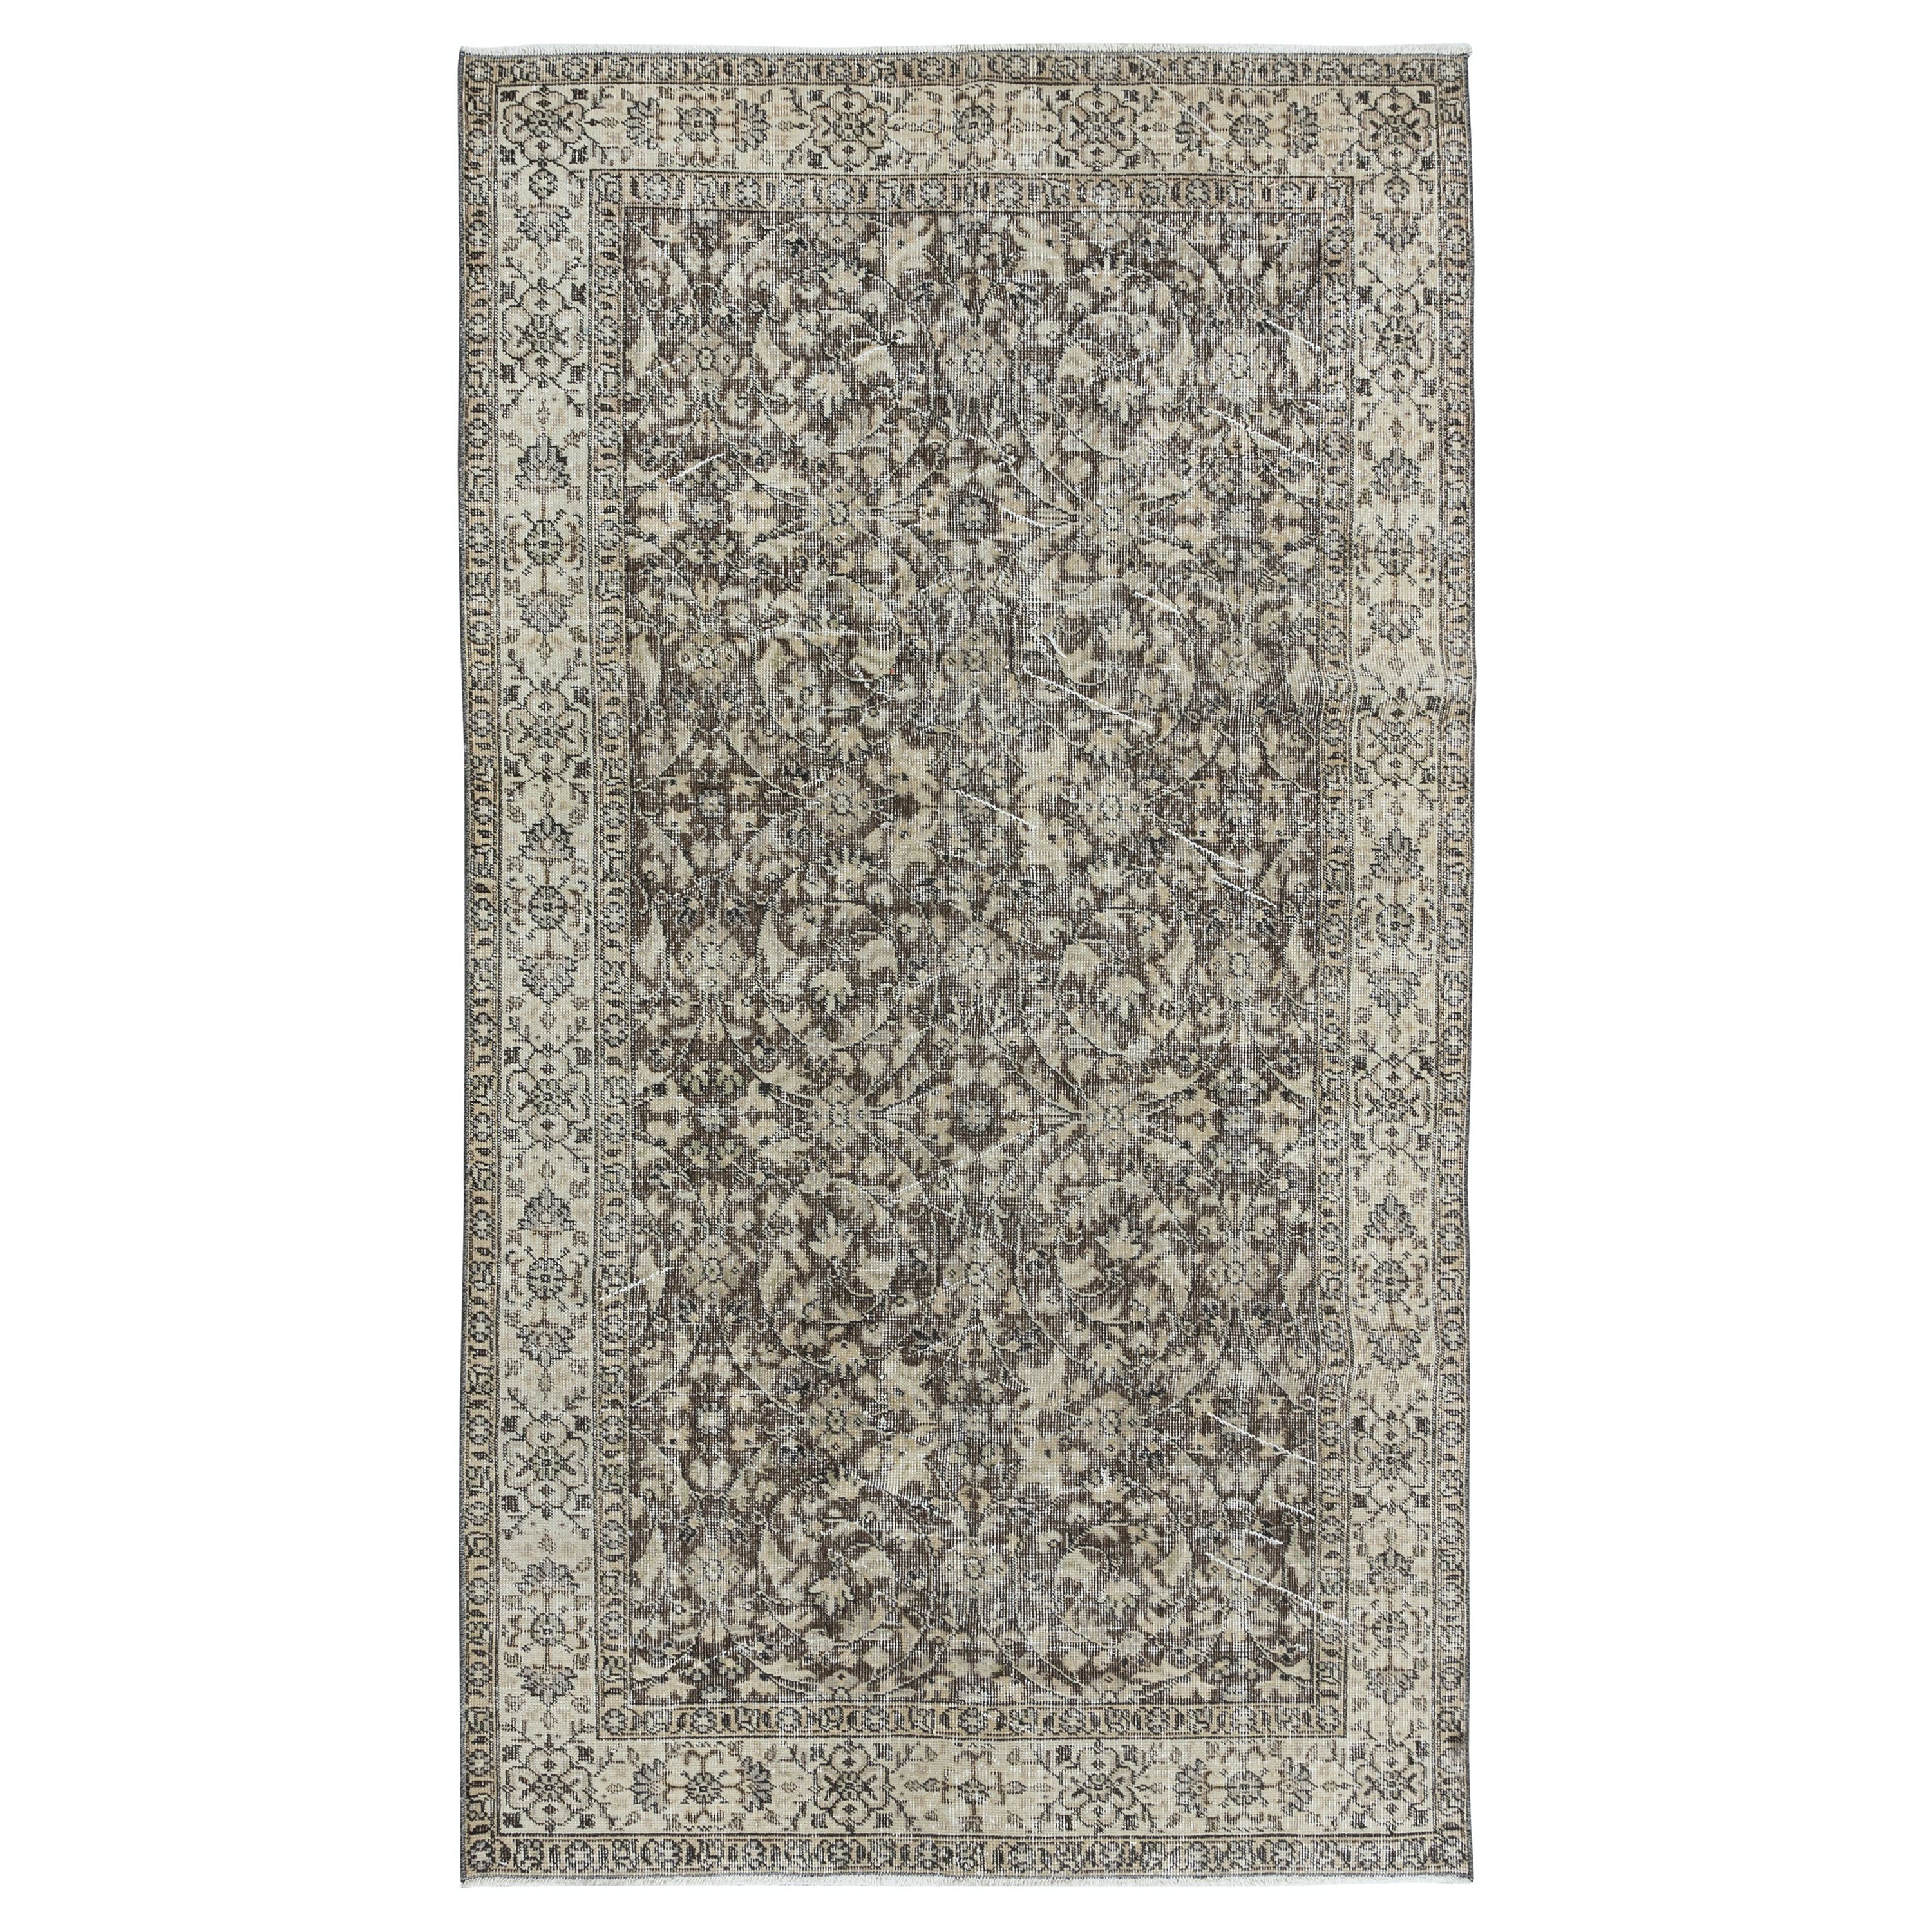 4.6x8.3 Ft Vintage Floral Rug, Hand Knotted Turkish Wool Carpet in Beige & Brown For Sale